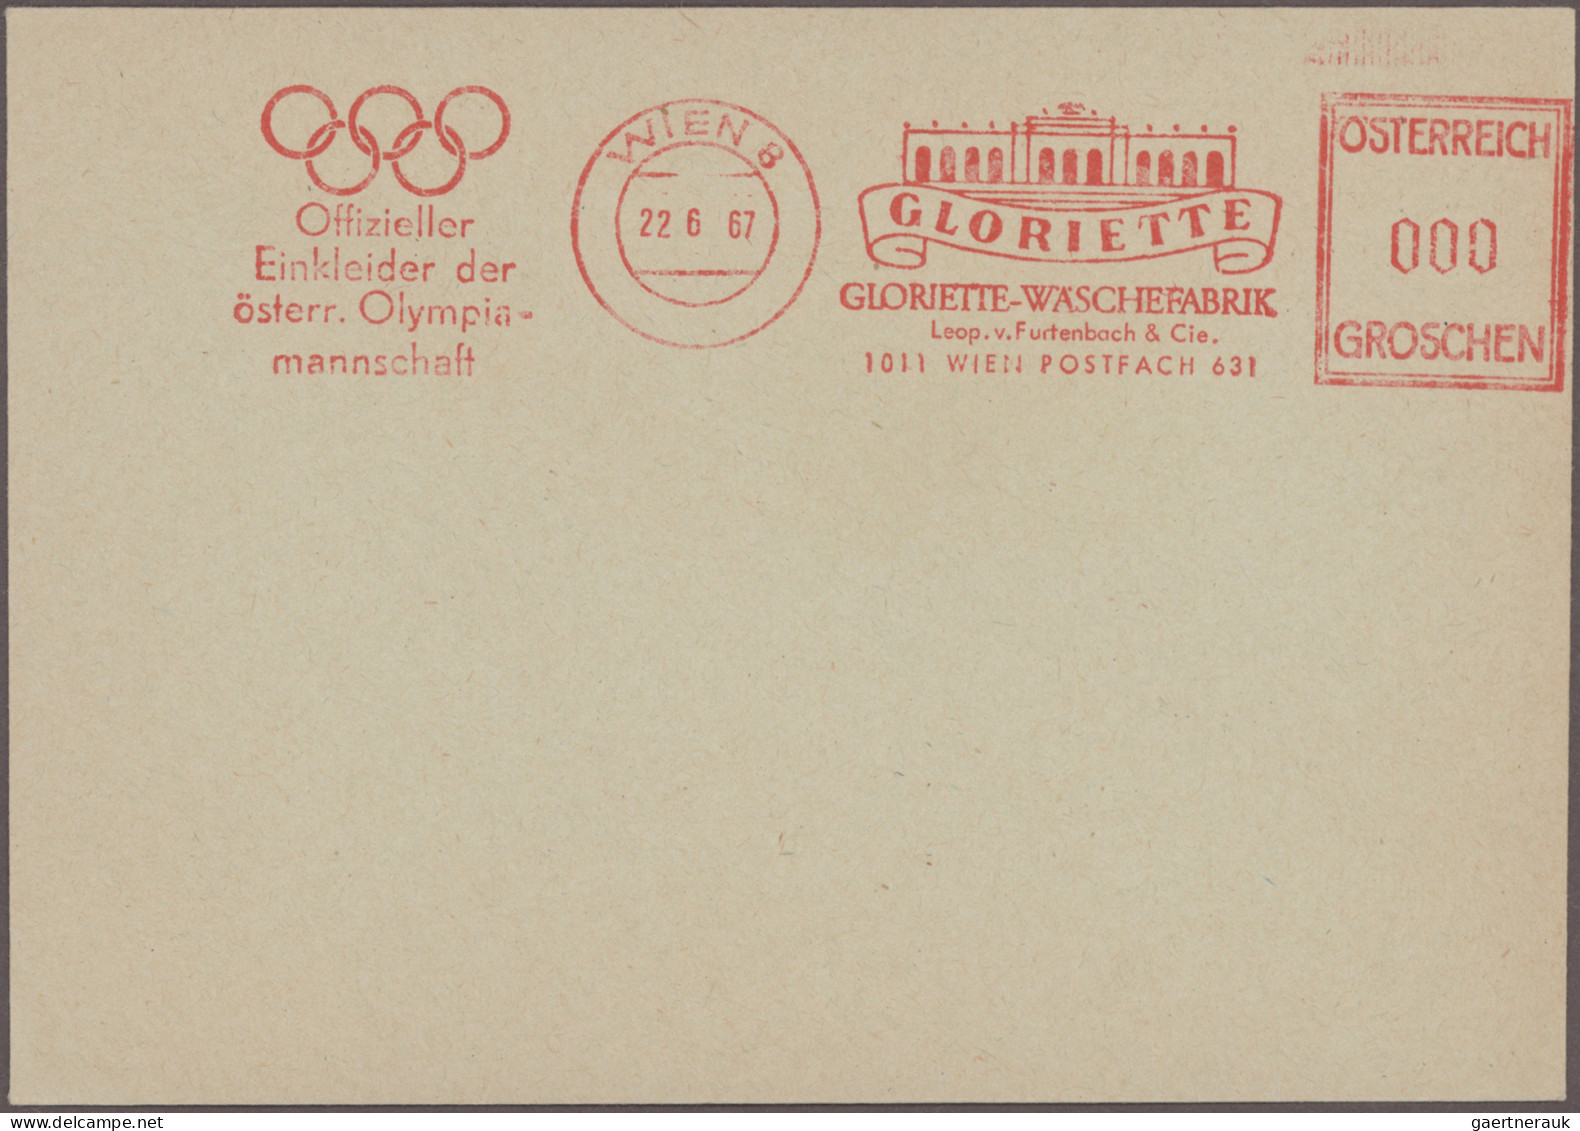 Thematics: Olympic Games: 1924/1976, "SPORTS" in general and "OLYMPIC GAMES" in